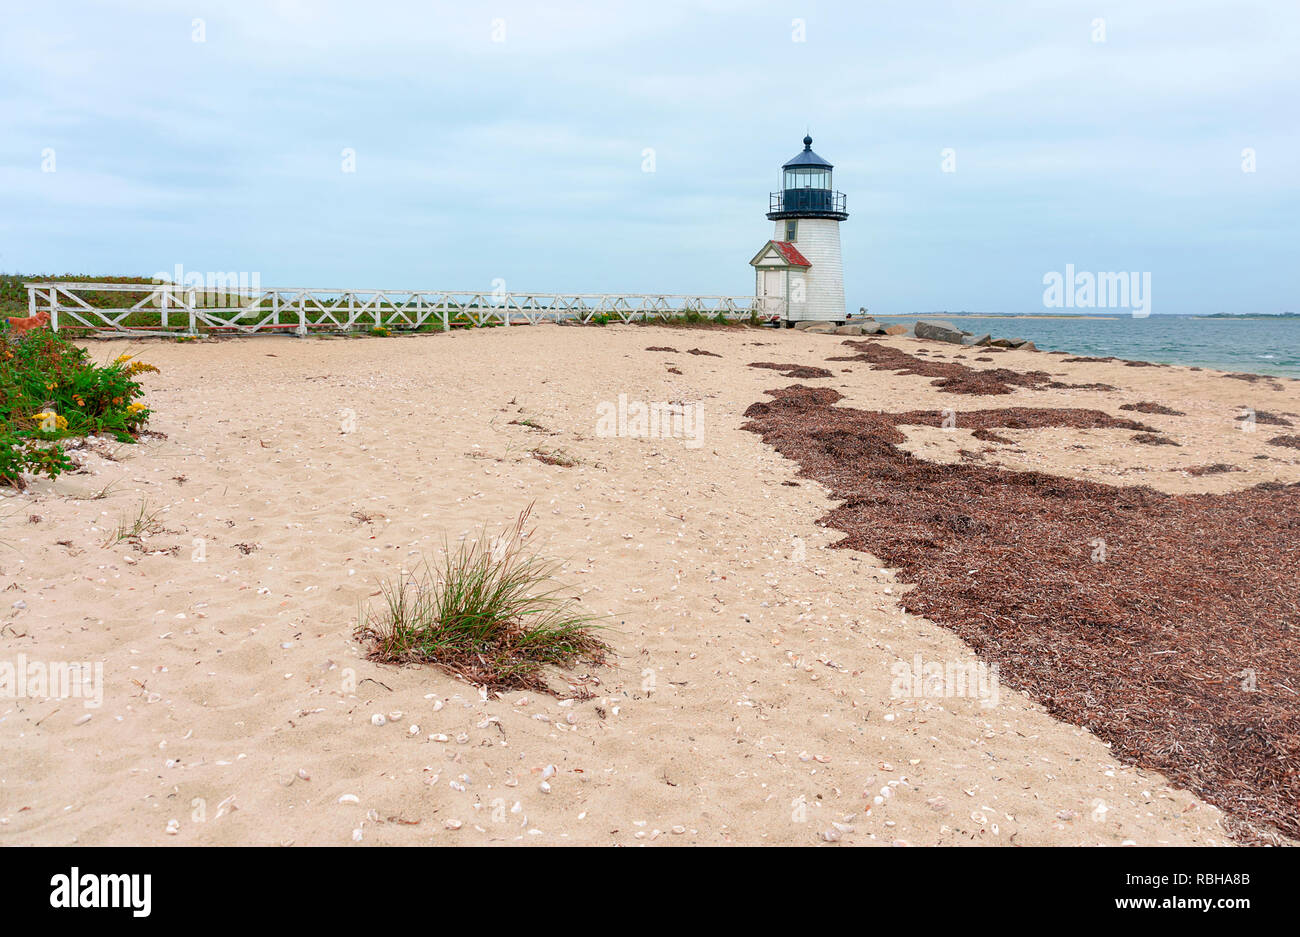 Brant Point Lighthouse, famous tourist attraction and Landmark of Nantucket Island Stock Photo